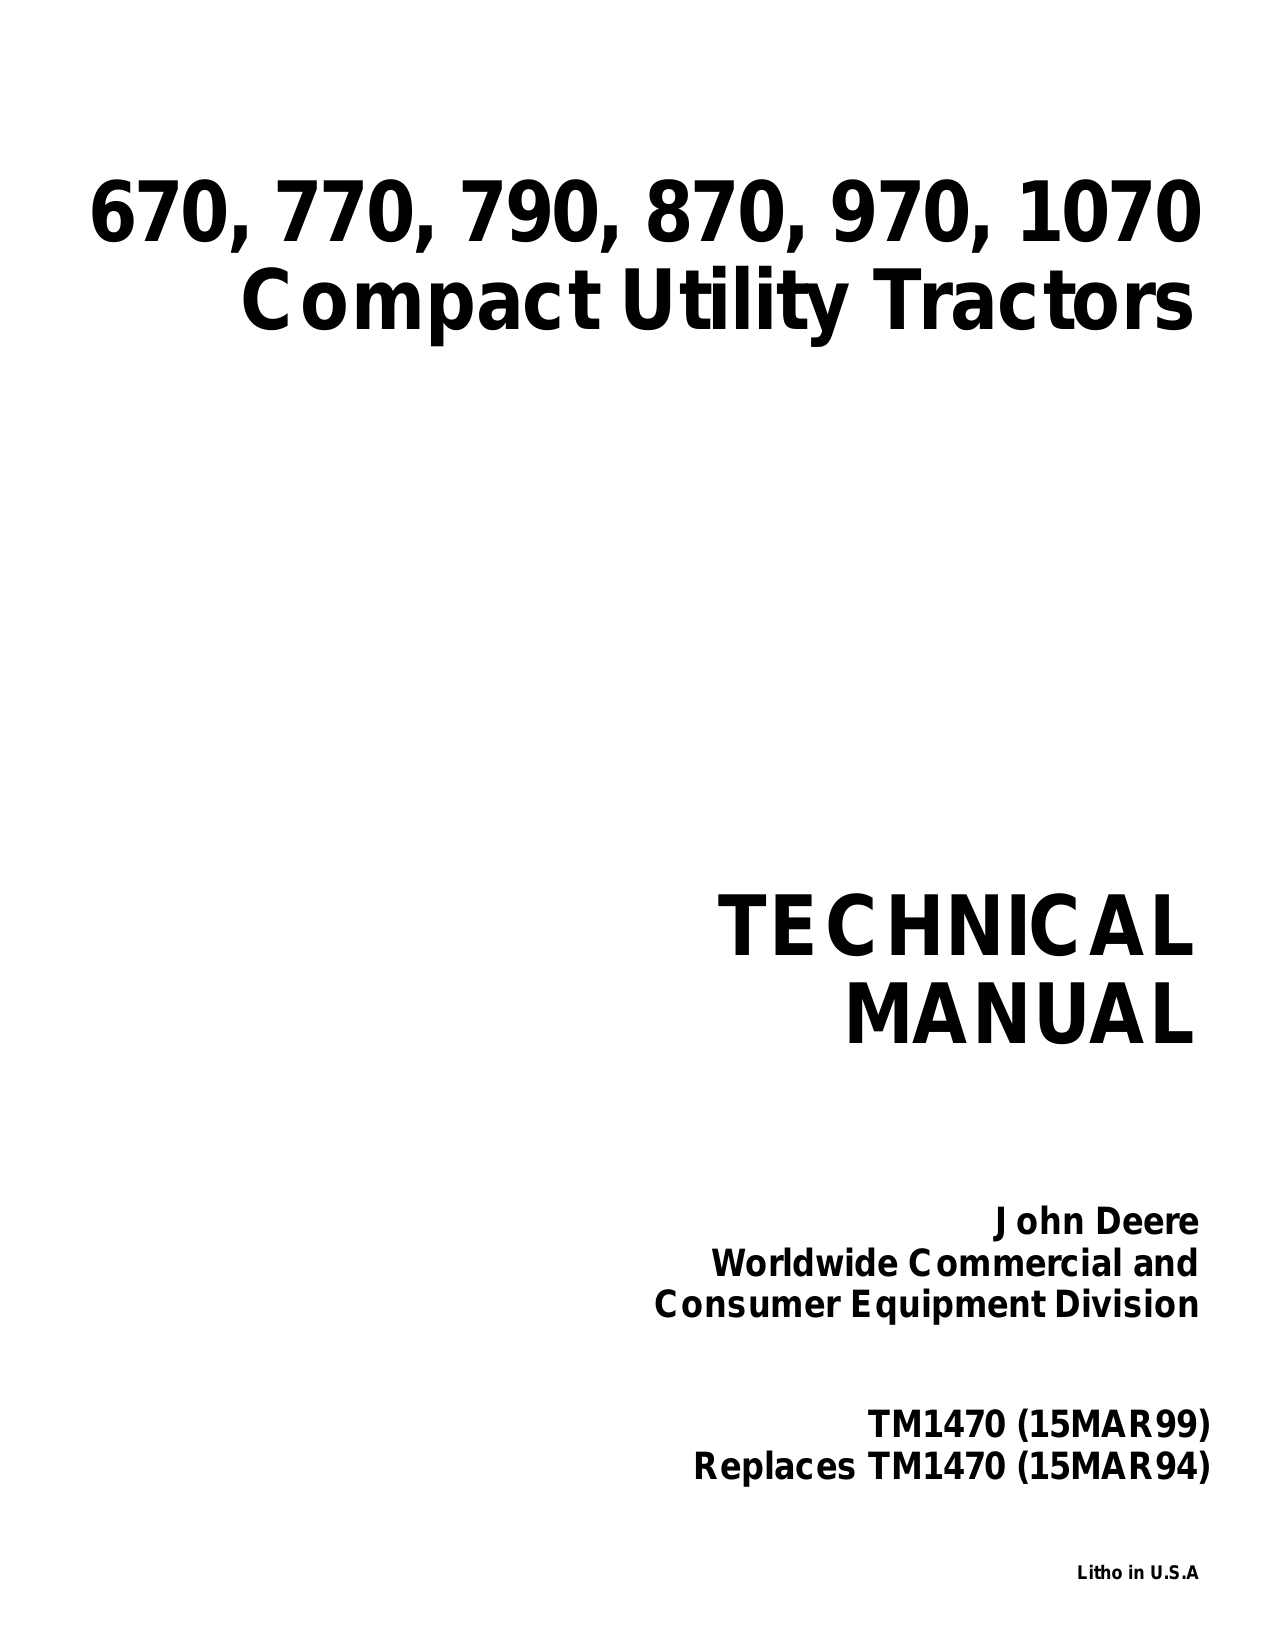 1989-2002 John Deere 670, 770, 790, 870, 970, 1070 compact utility tractor technical manual Preview image 6